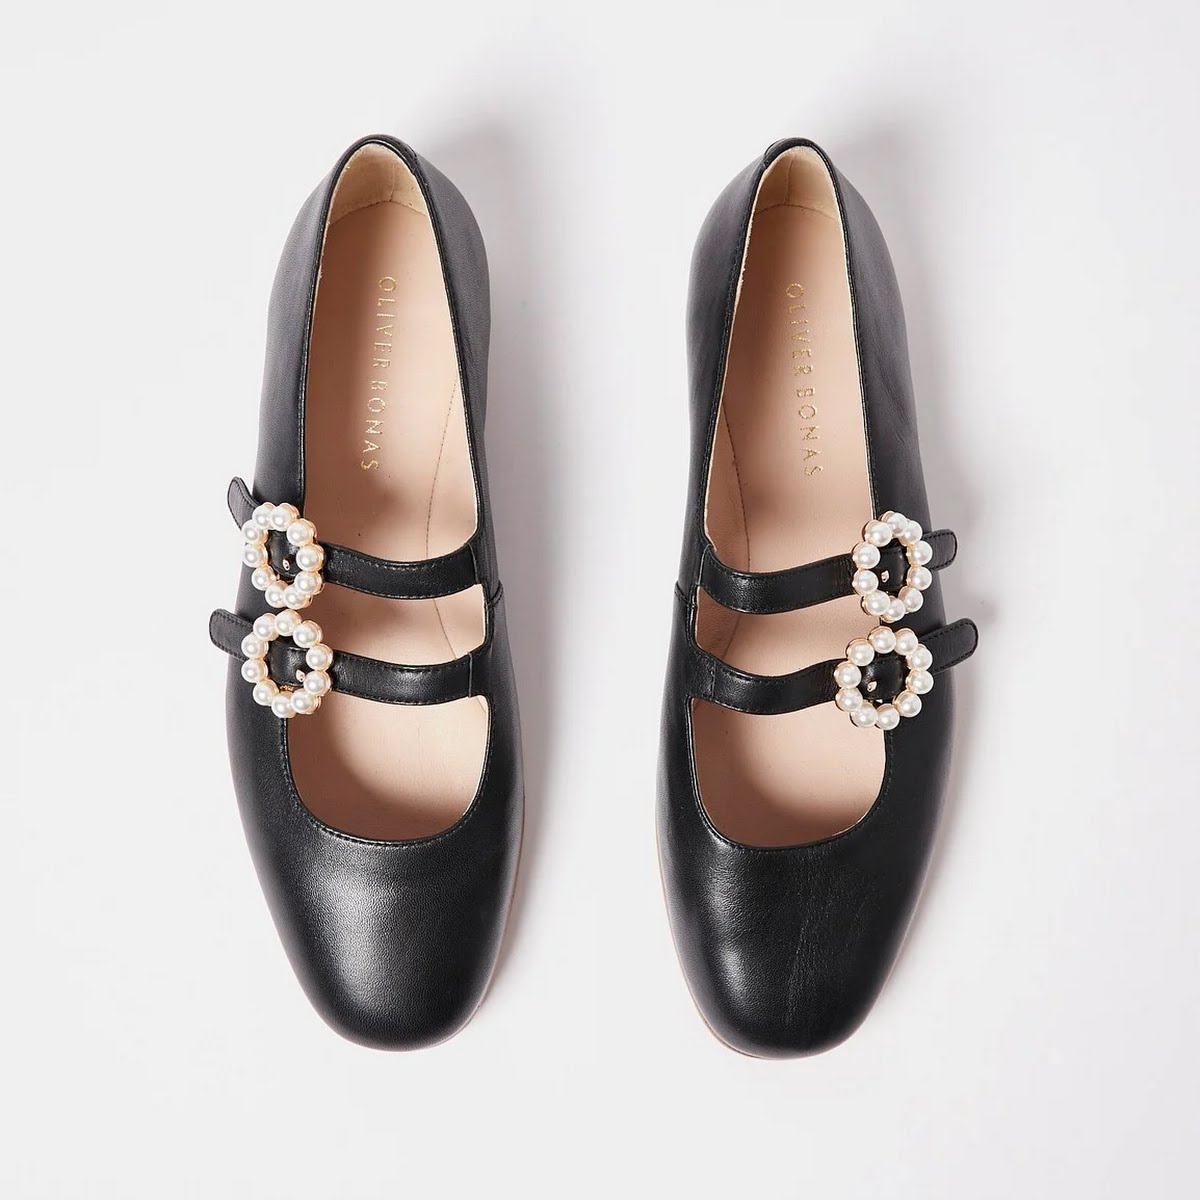 Mary Jane Pearl Buckle Black Leather Shoes, €84, Oliver Bonas